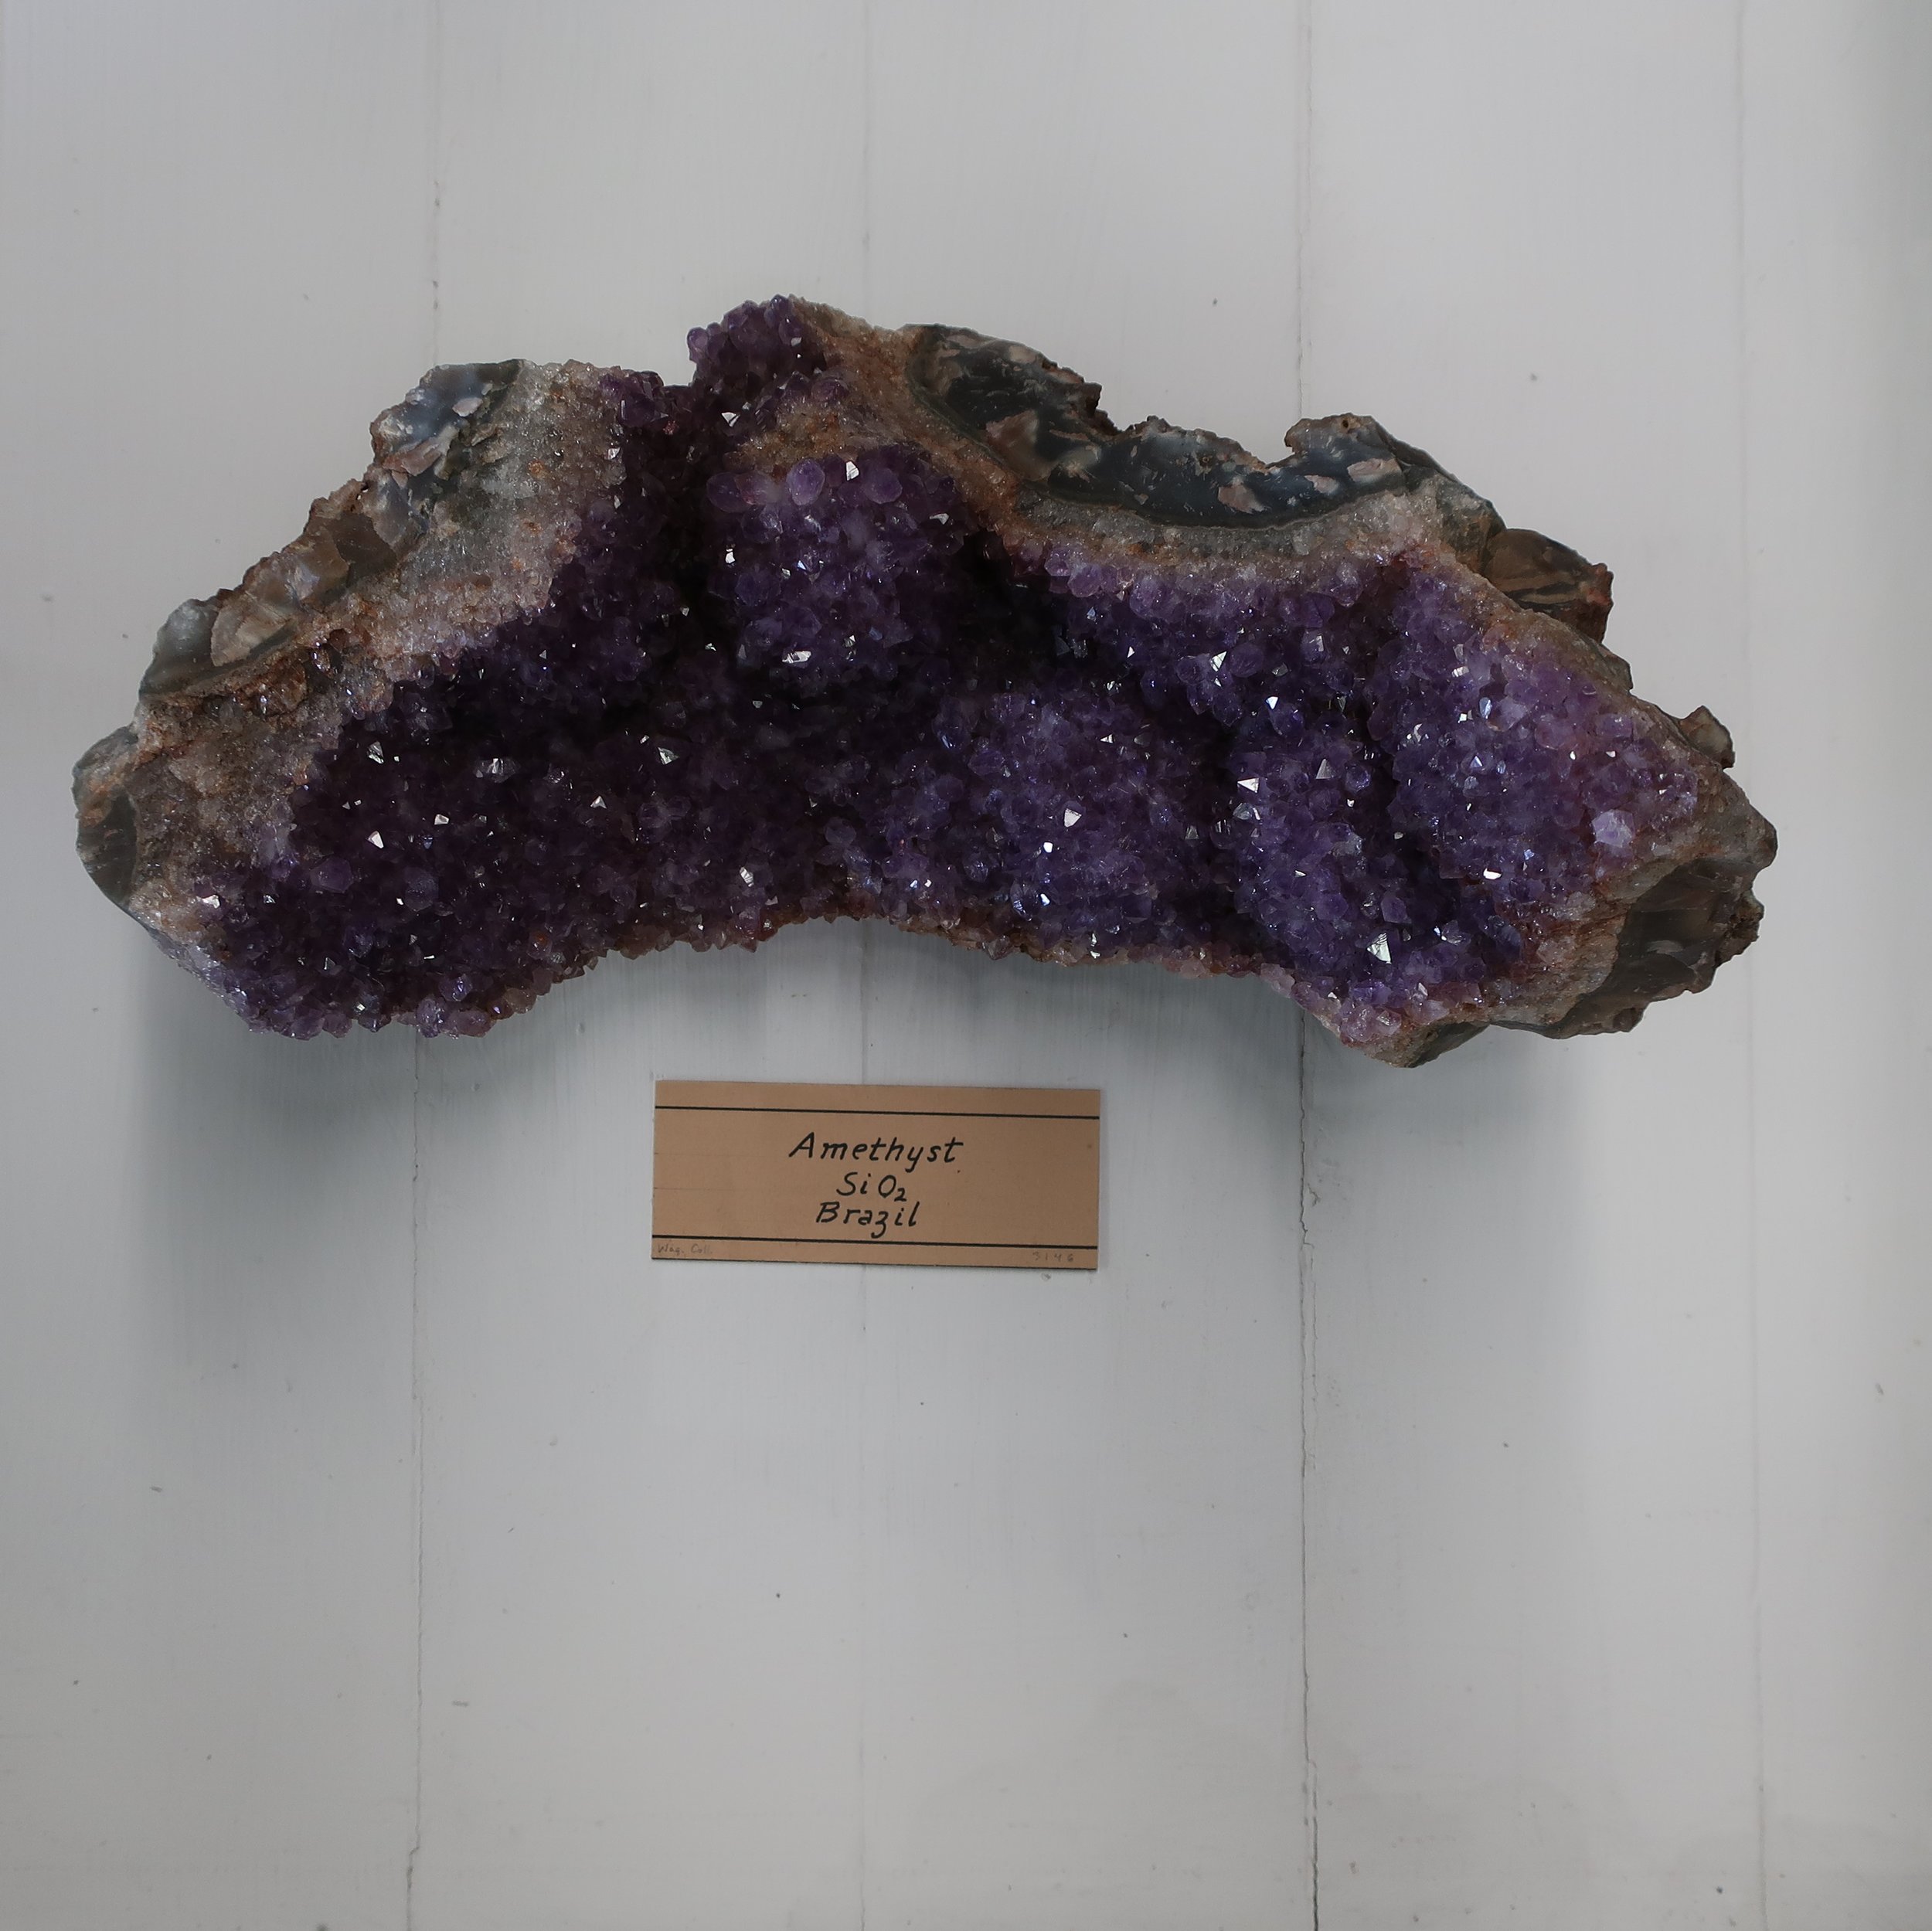   “Amethyst  yields 97.50% Silica with a trace of oxide of Iron, Alumina &amp; manganeese. Amethyst chiefly differs from Common Quartz in its colour, which is purplish violet, supposed to be derived from a minute proportion of Iron and Manganeese whi